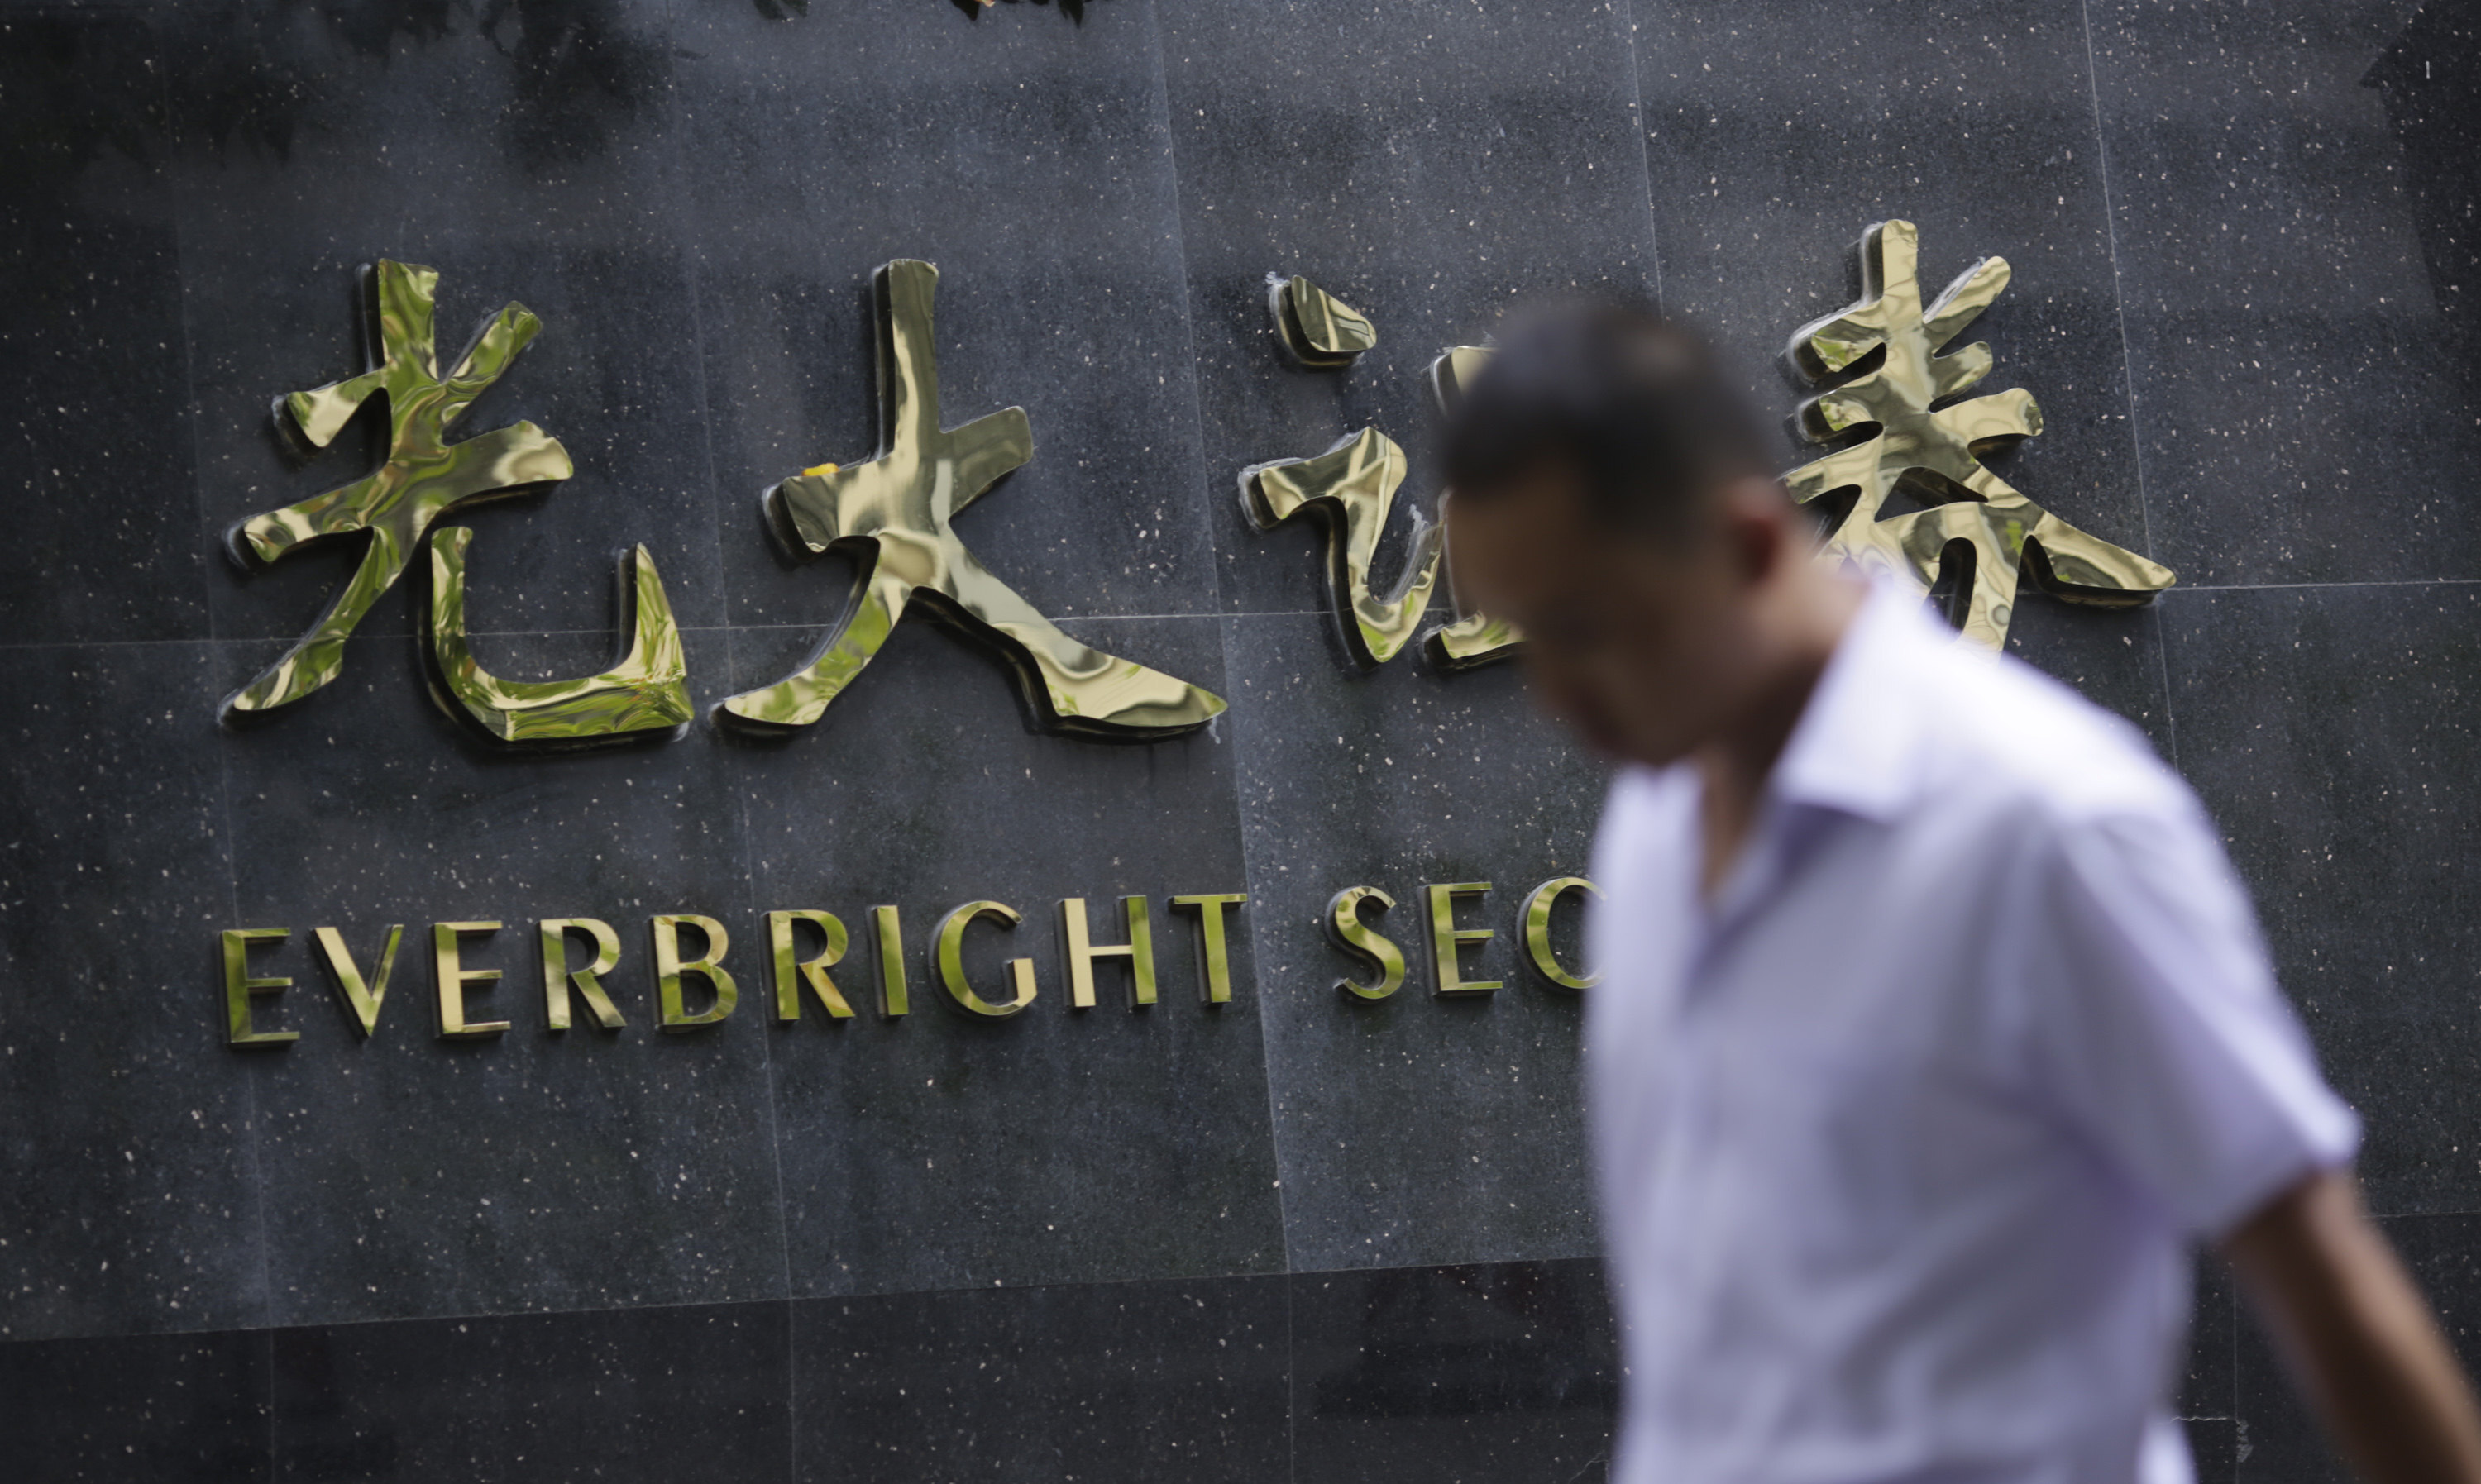 The sign of Everbright Securities in Shanghai on August 19, 2013. Photo: AP